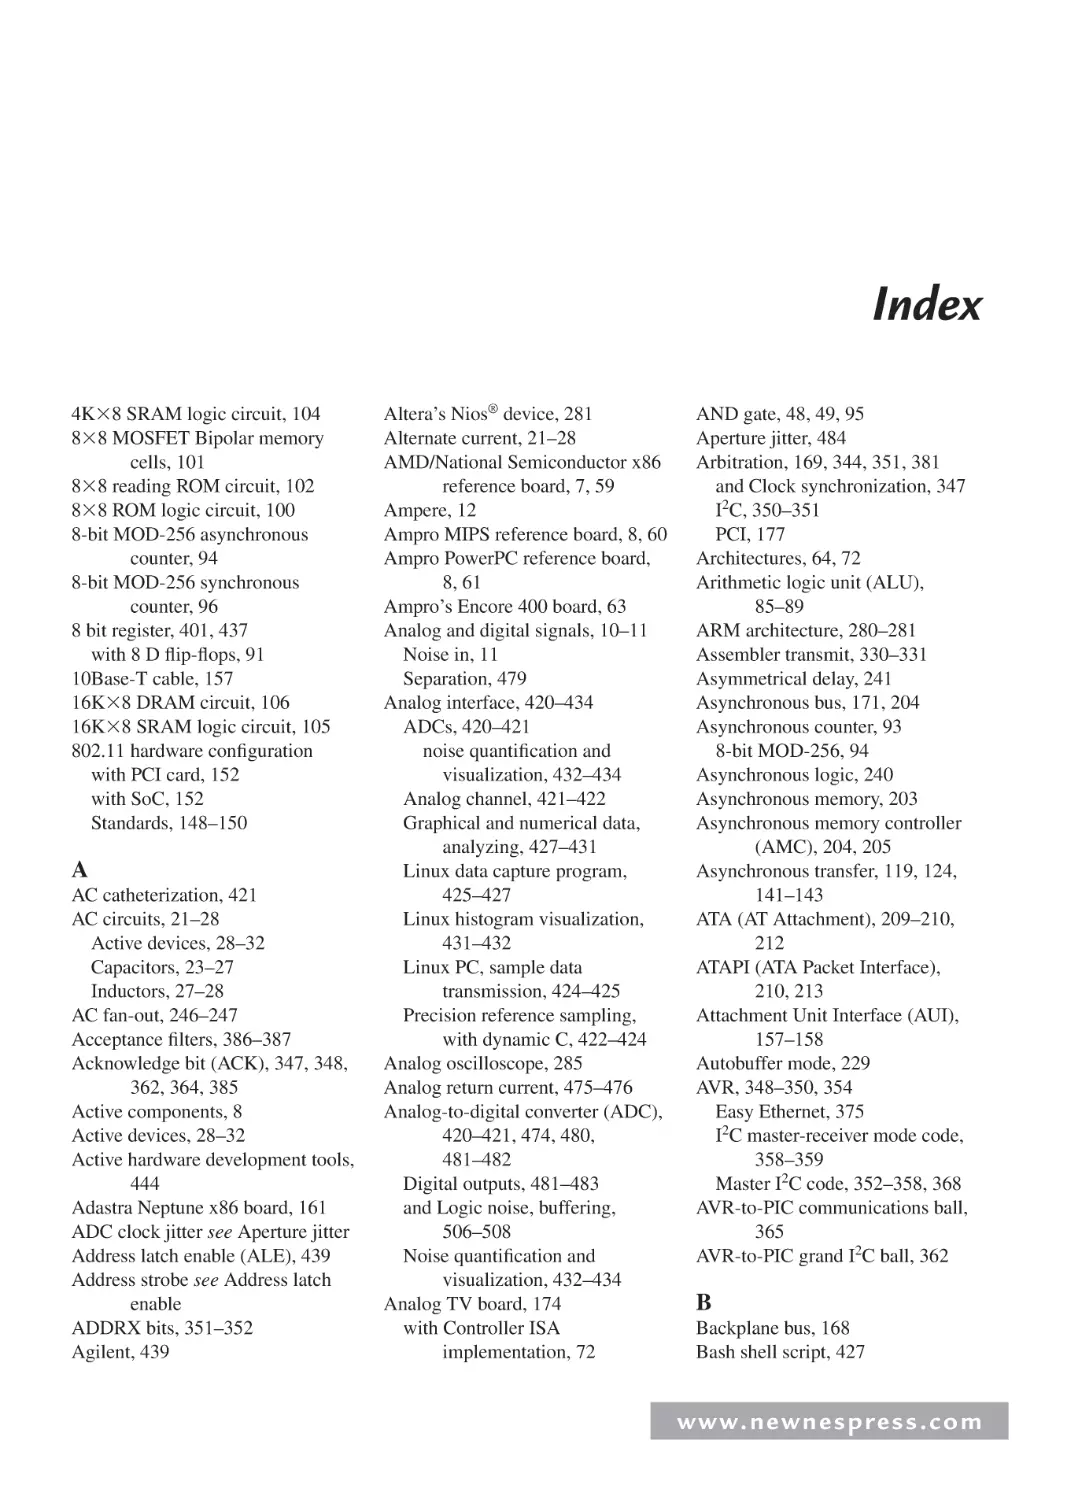 Index (with page links)